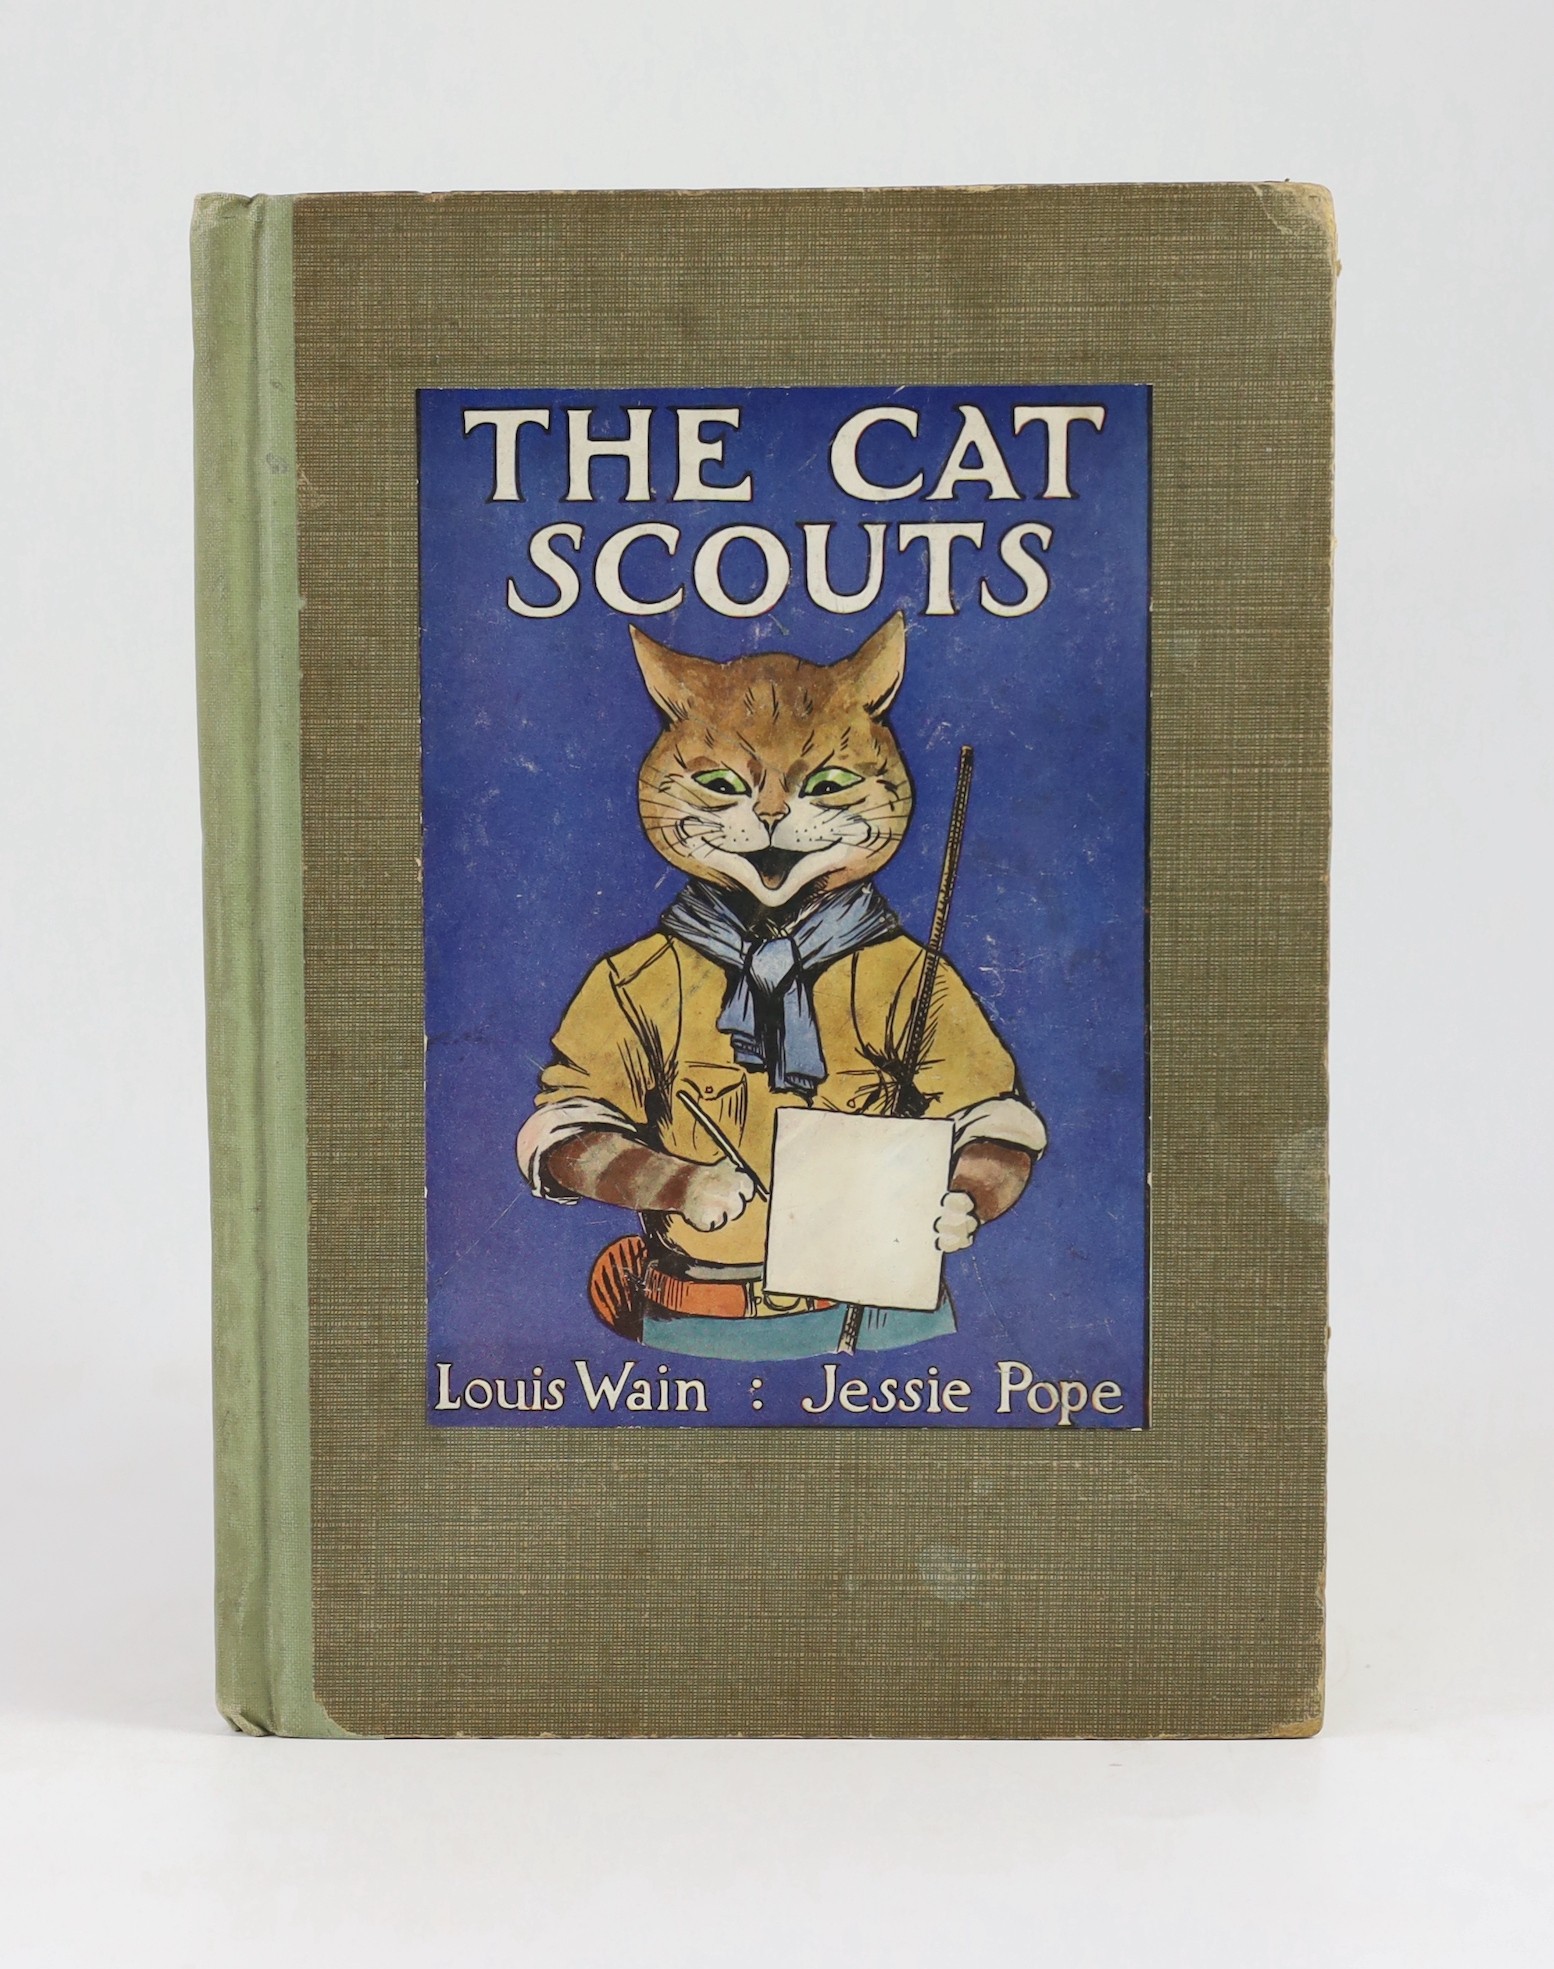 Pope, Jessie - The Cat Scouts, 1st edition, illustrated with 8 colour by Louis Wain, 4to, original half cloth, Blackie and Son Limited, London, [1912]